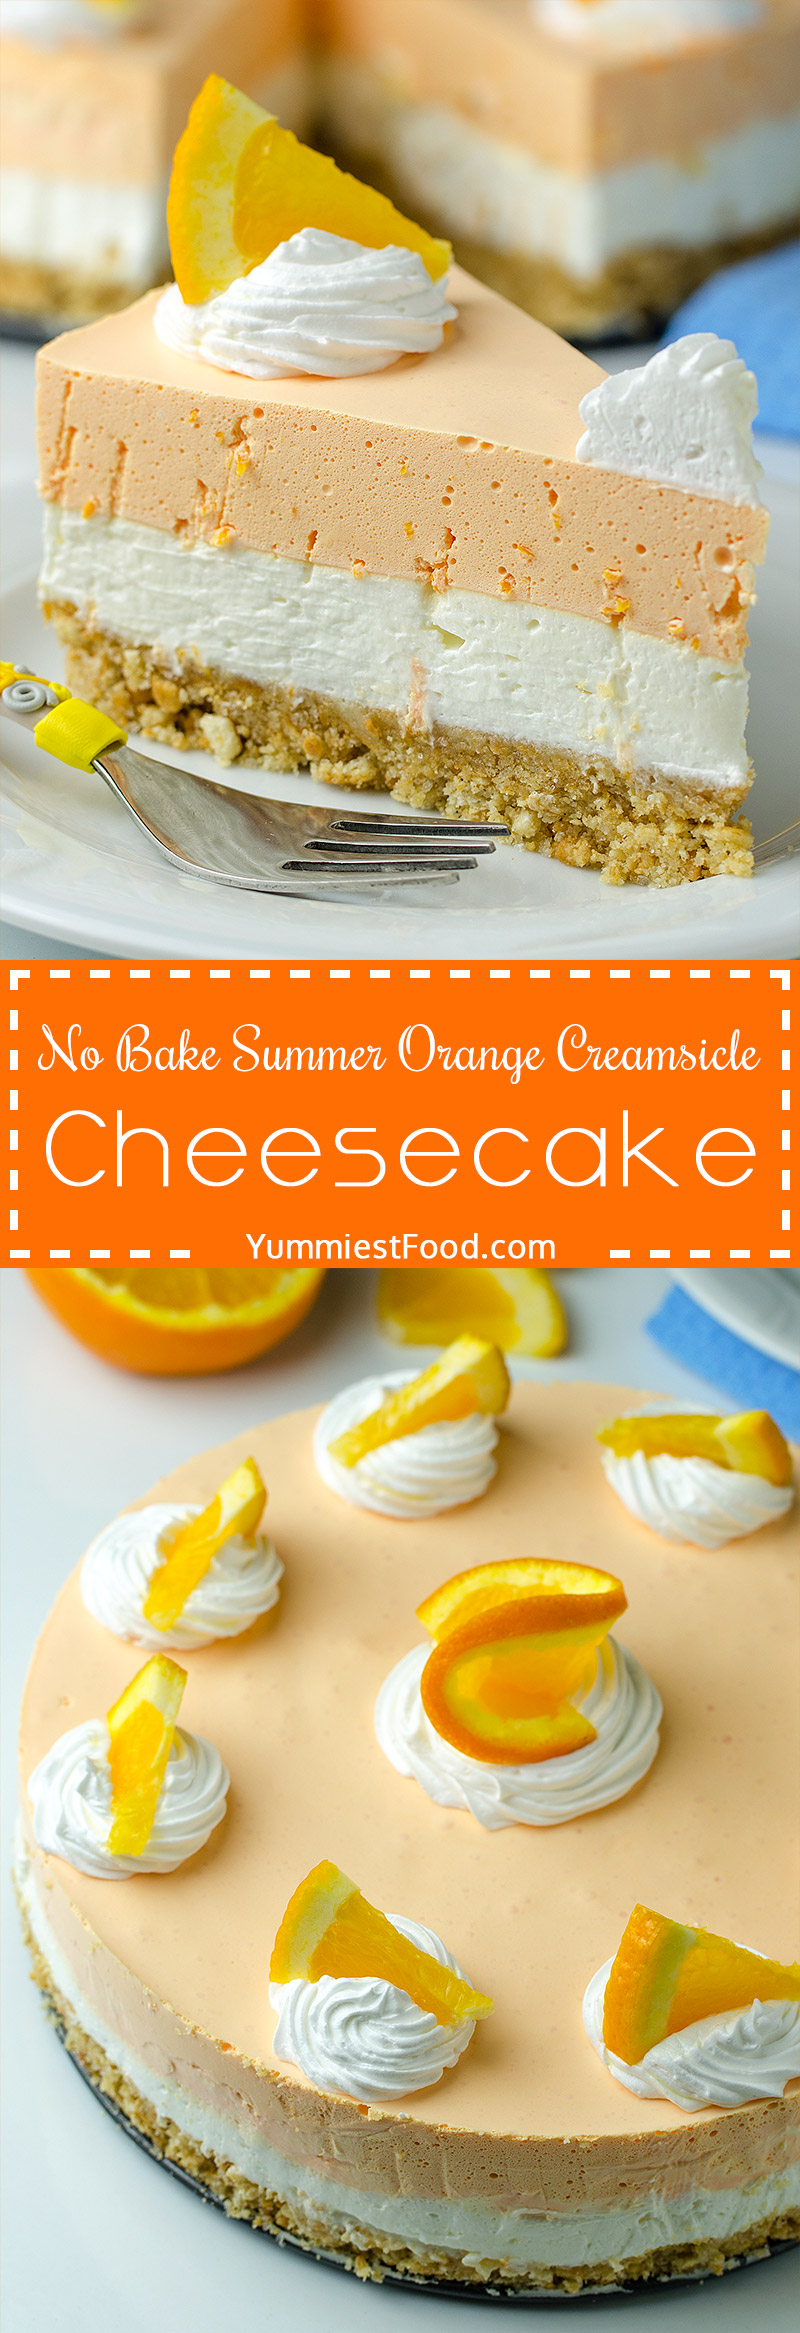 NO BAKE SUMMER ORANGE CREAMSICLE CHEESECAKE - is a light dessert recipe that is perfect for summer